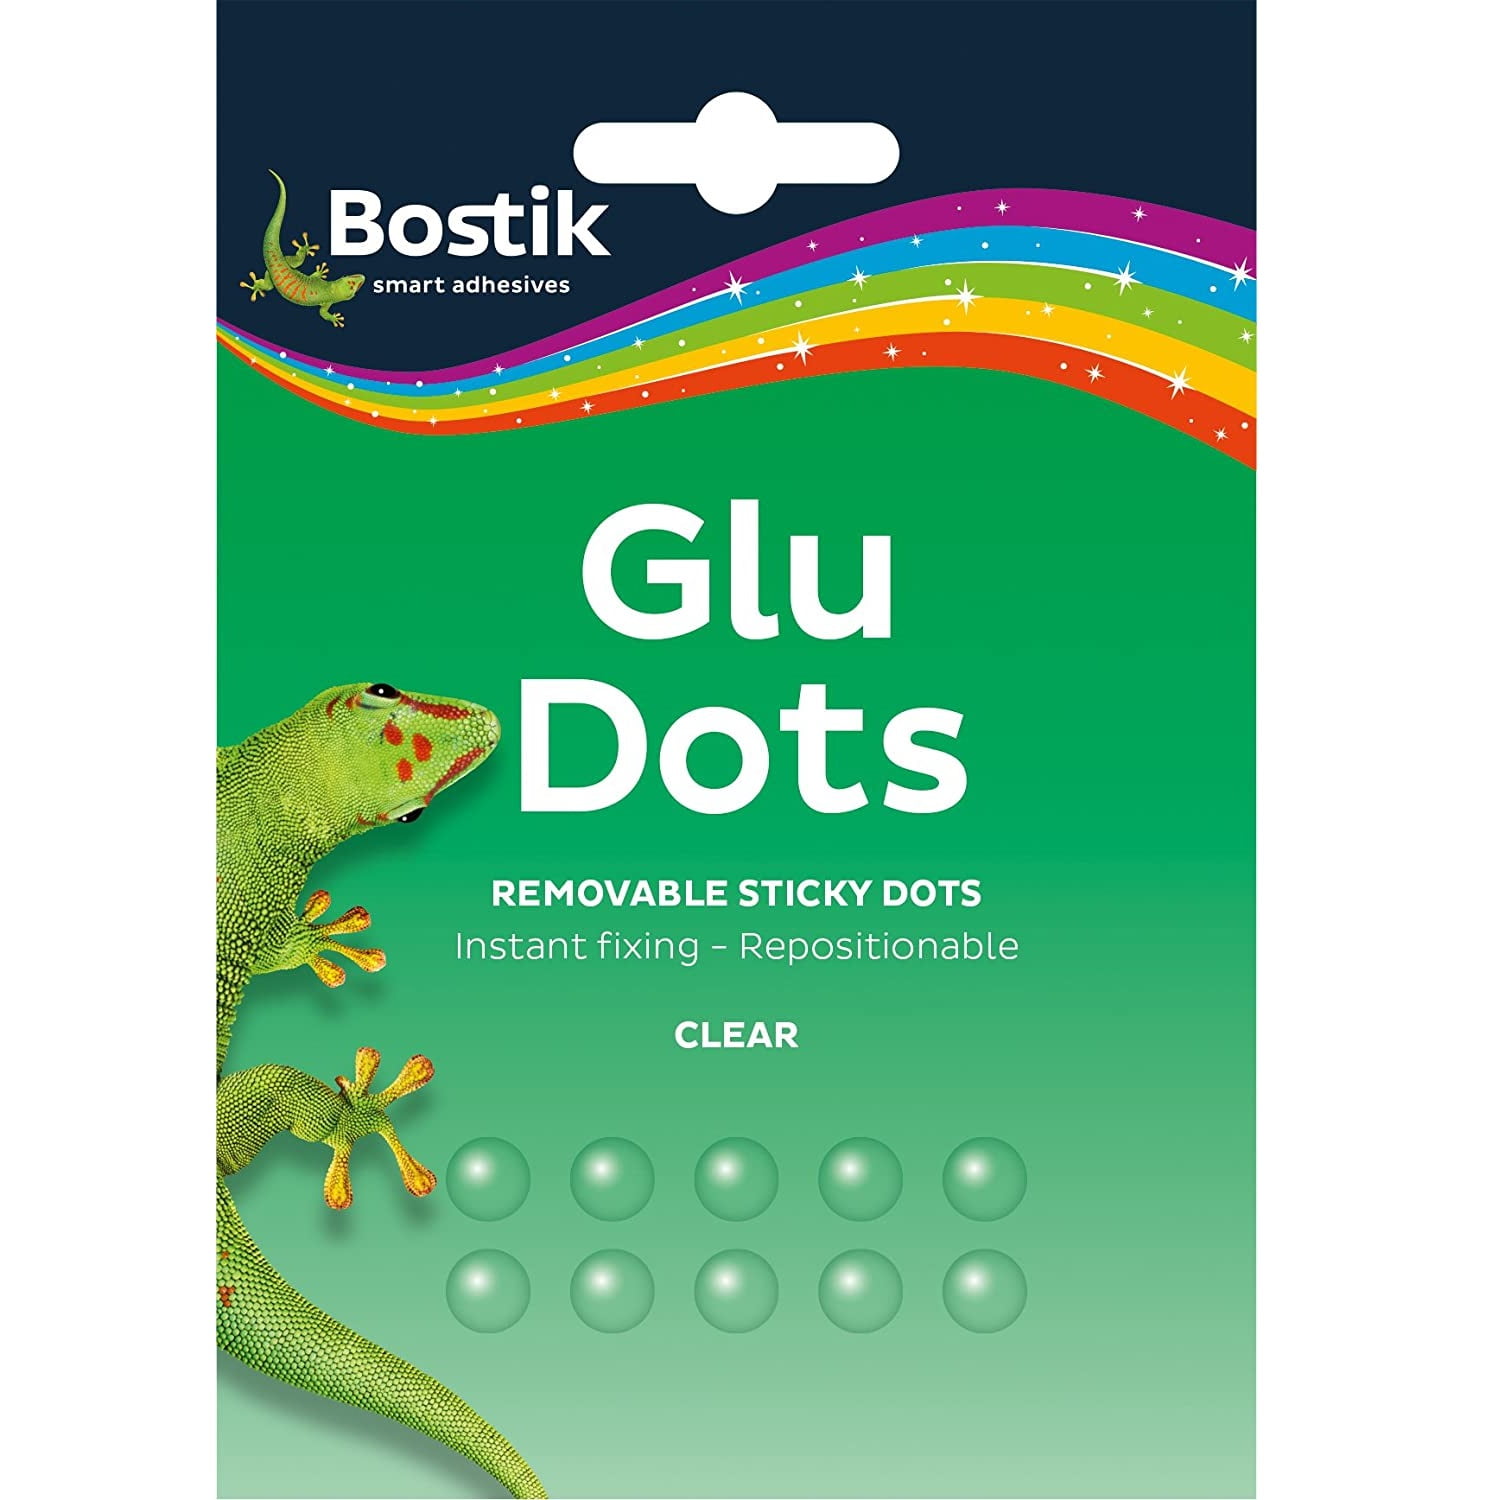 What are Removable Glu Dots and how to use them